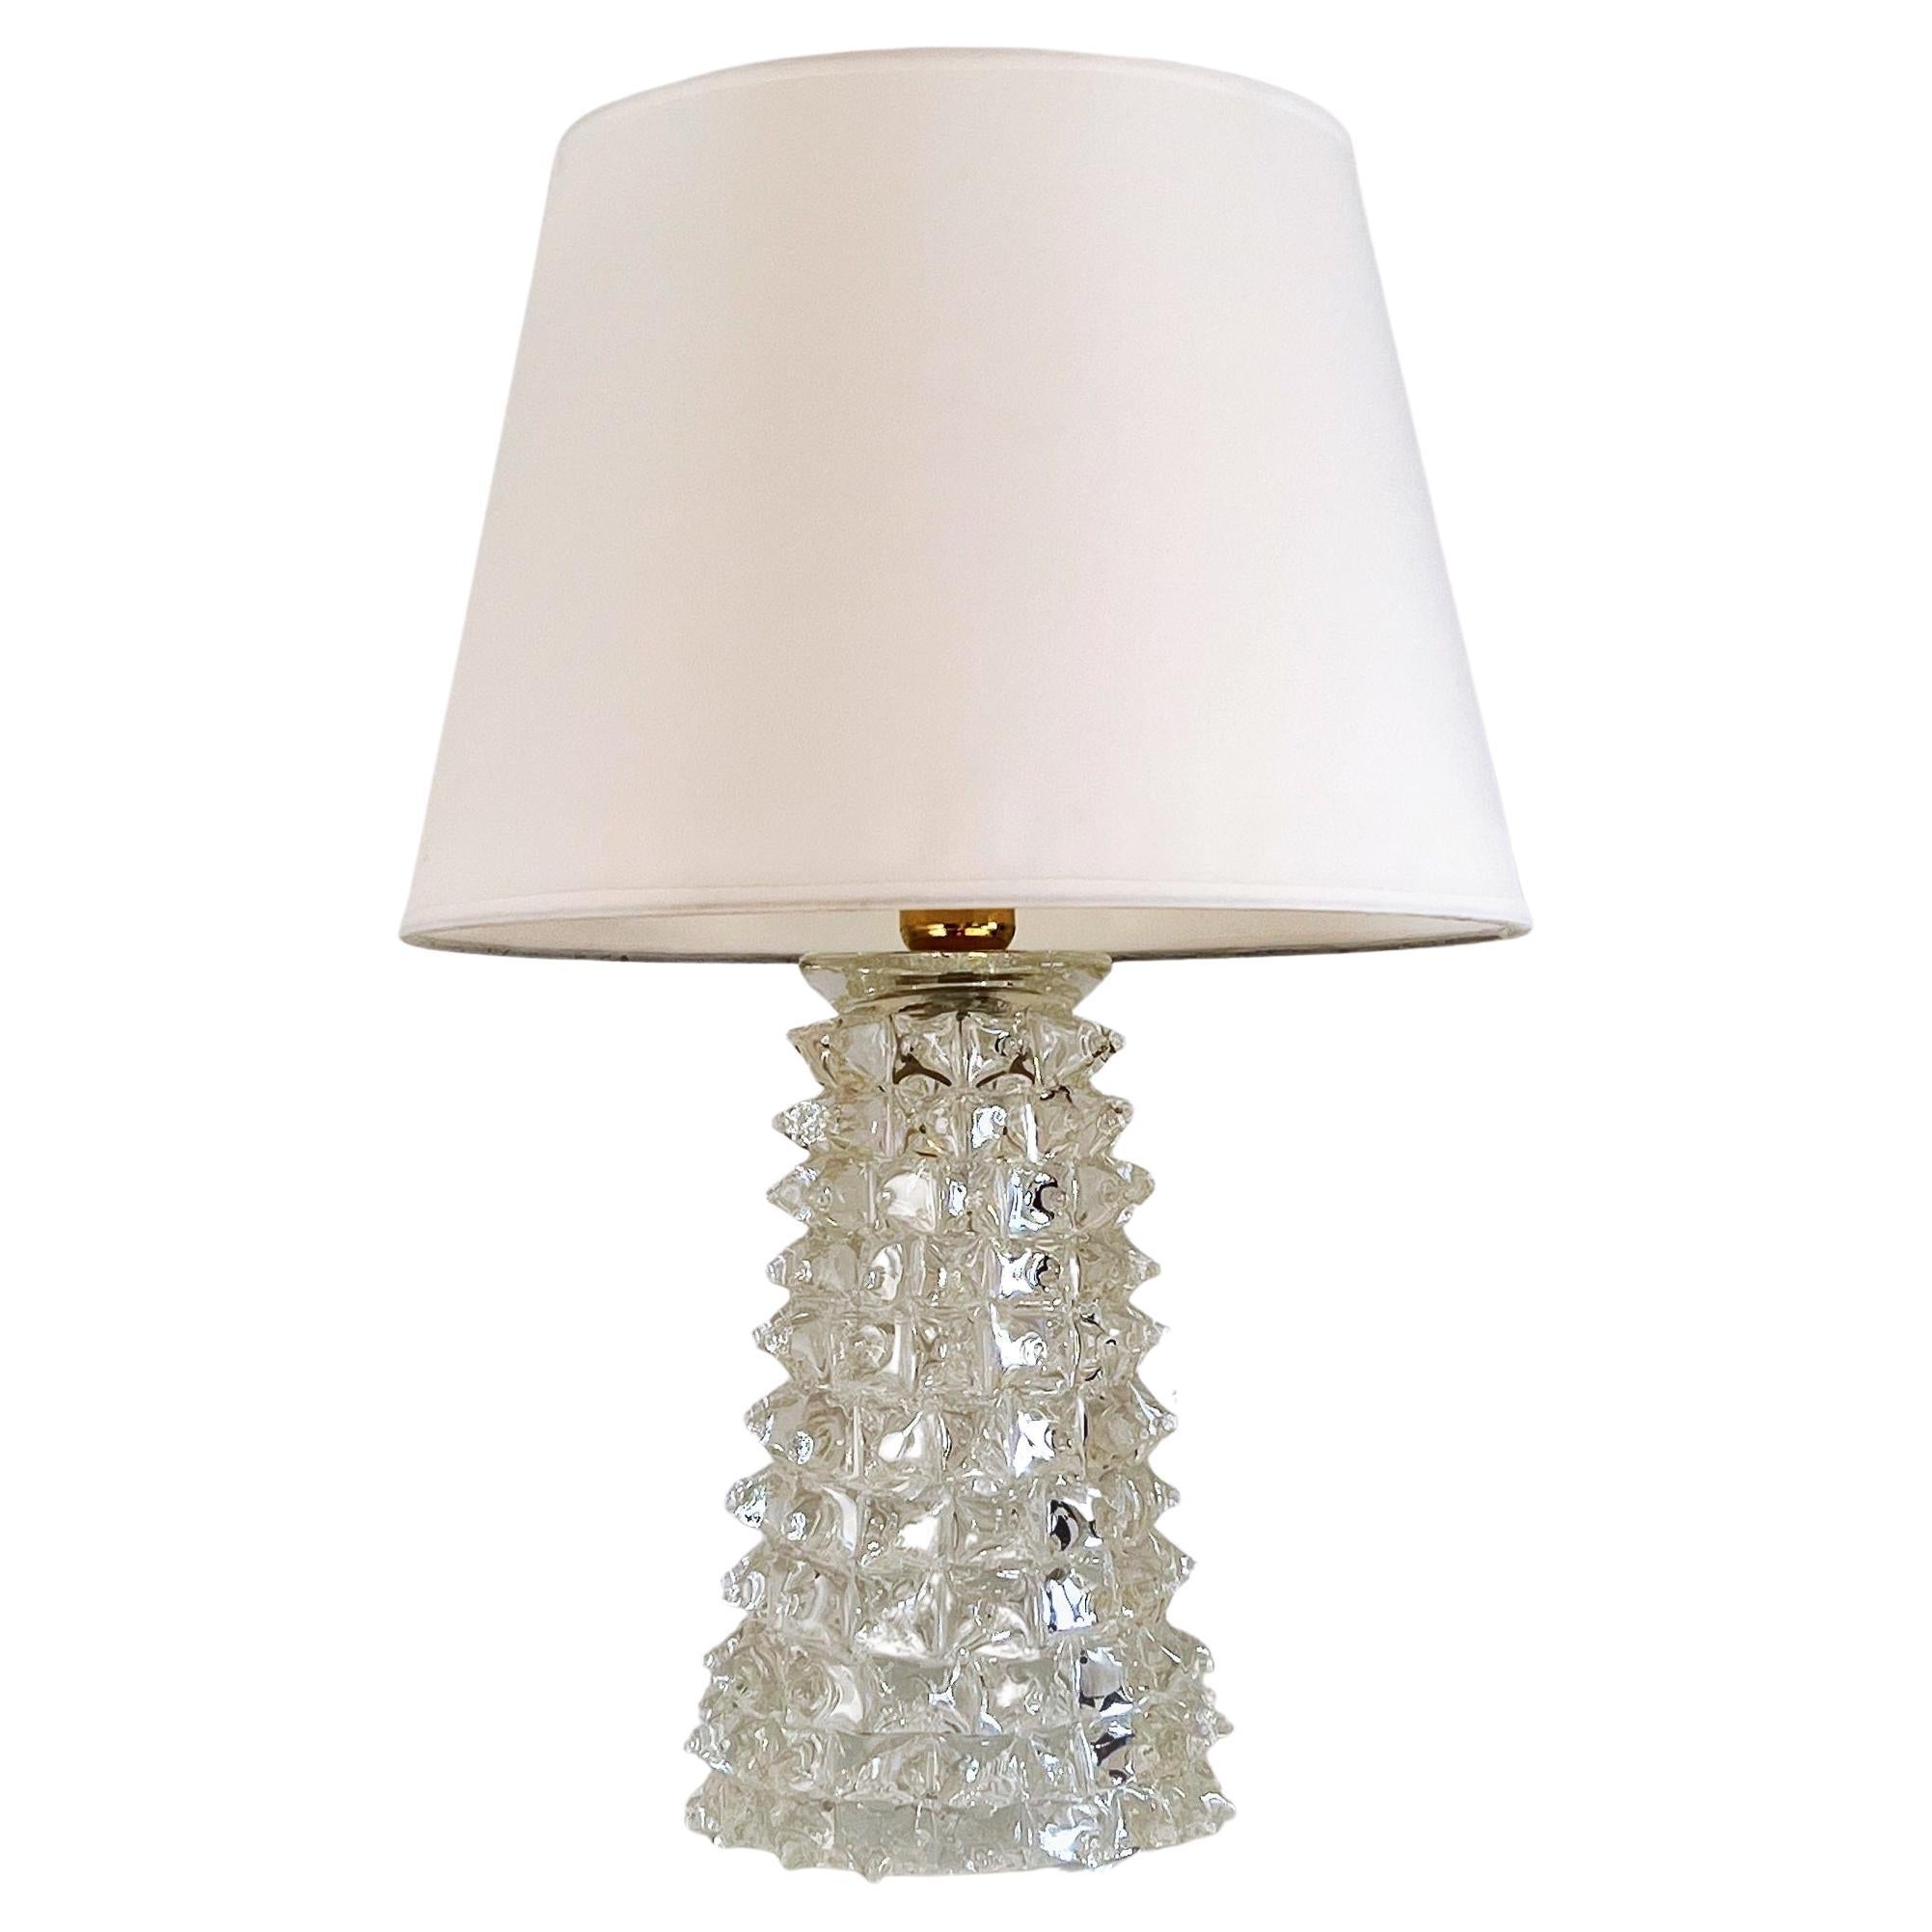 Italian Midcentury Rostrato Crystal Glass Table Lamp in Barovier Toso Style 1950